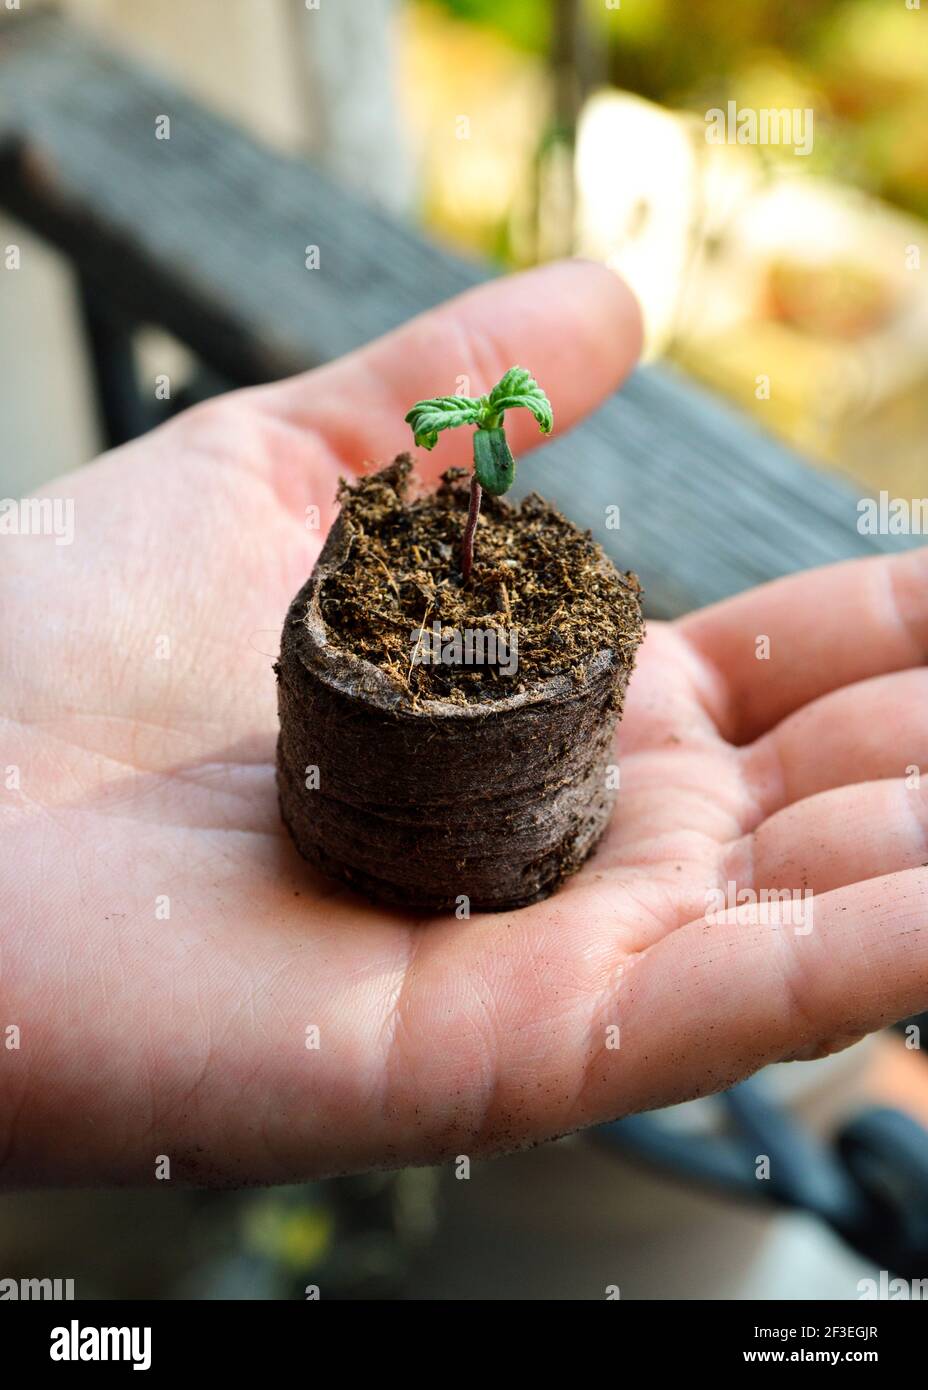 Plant shoot emerging from a peat tablet in a hand Stock Photo